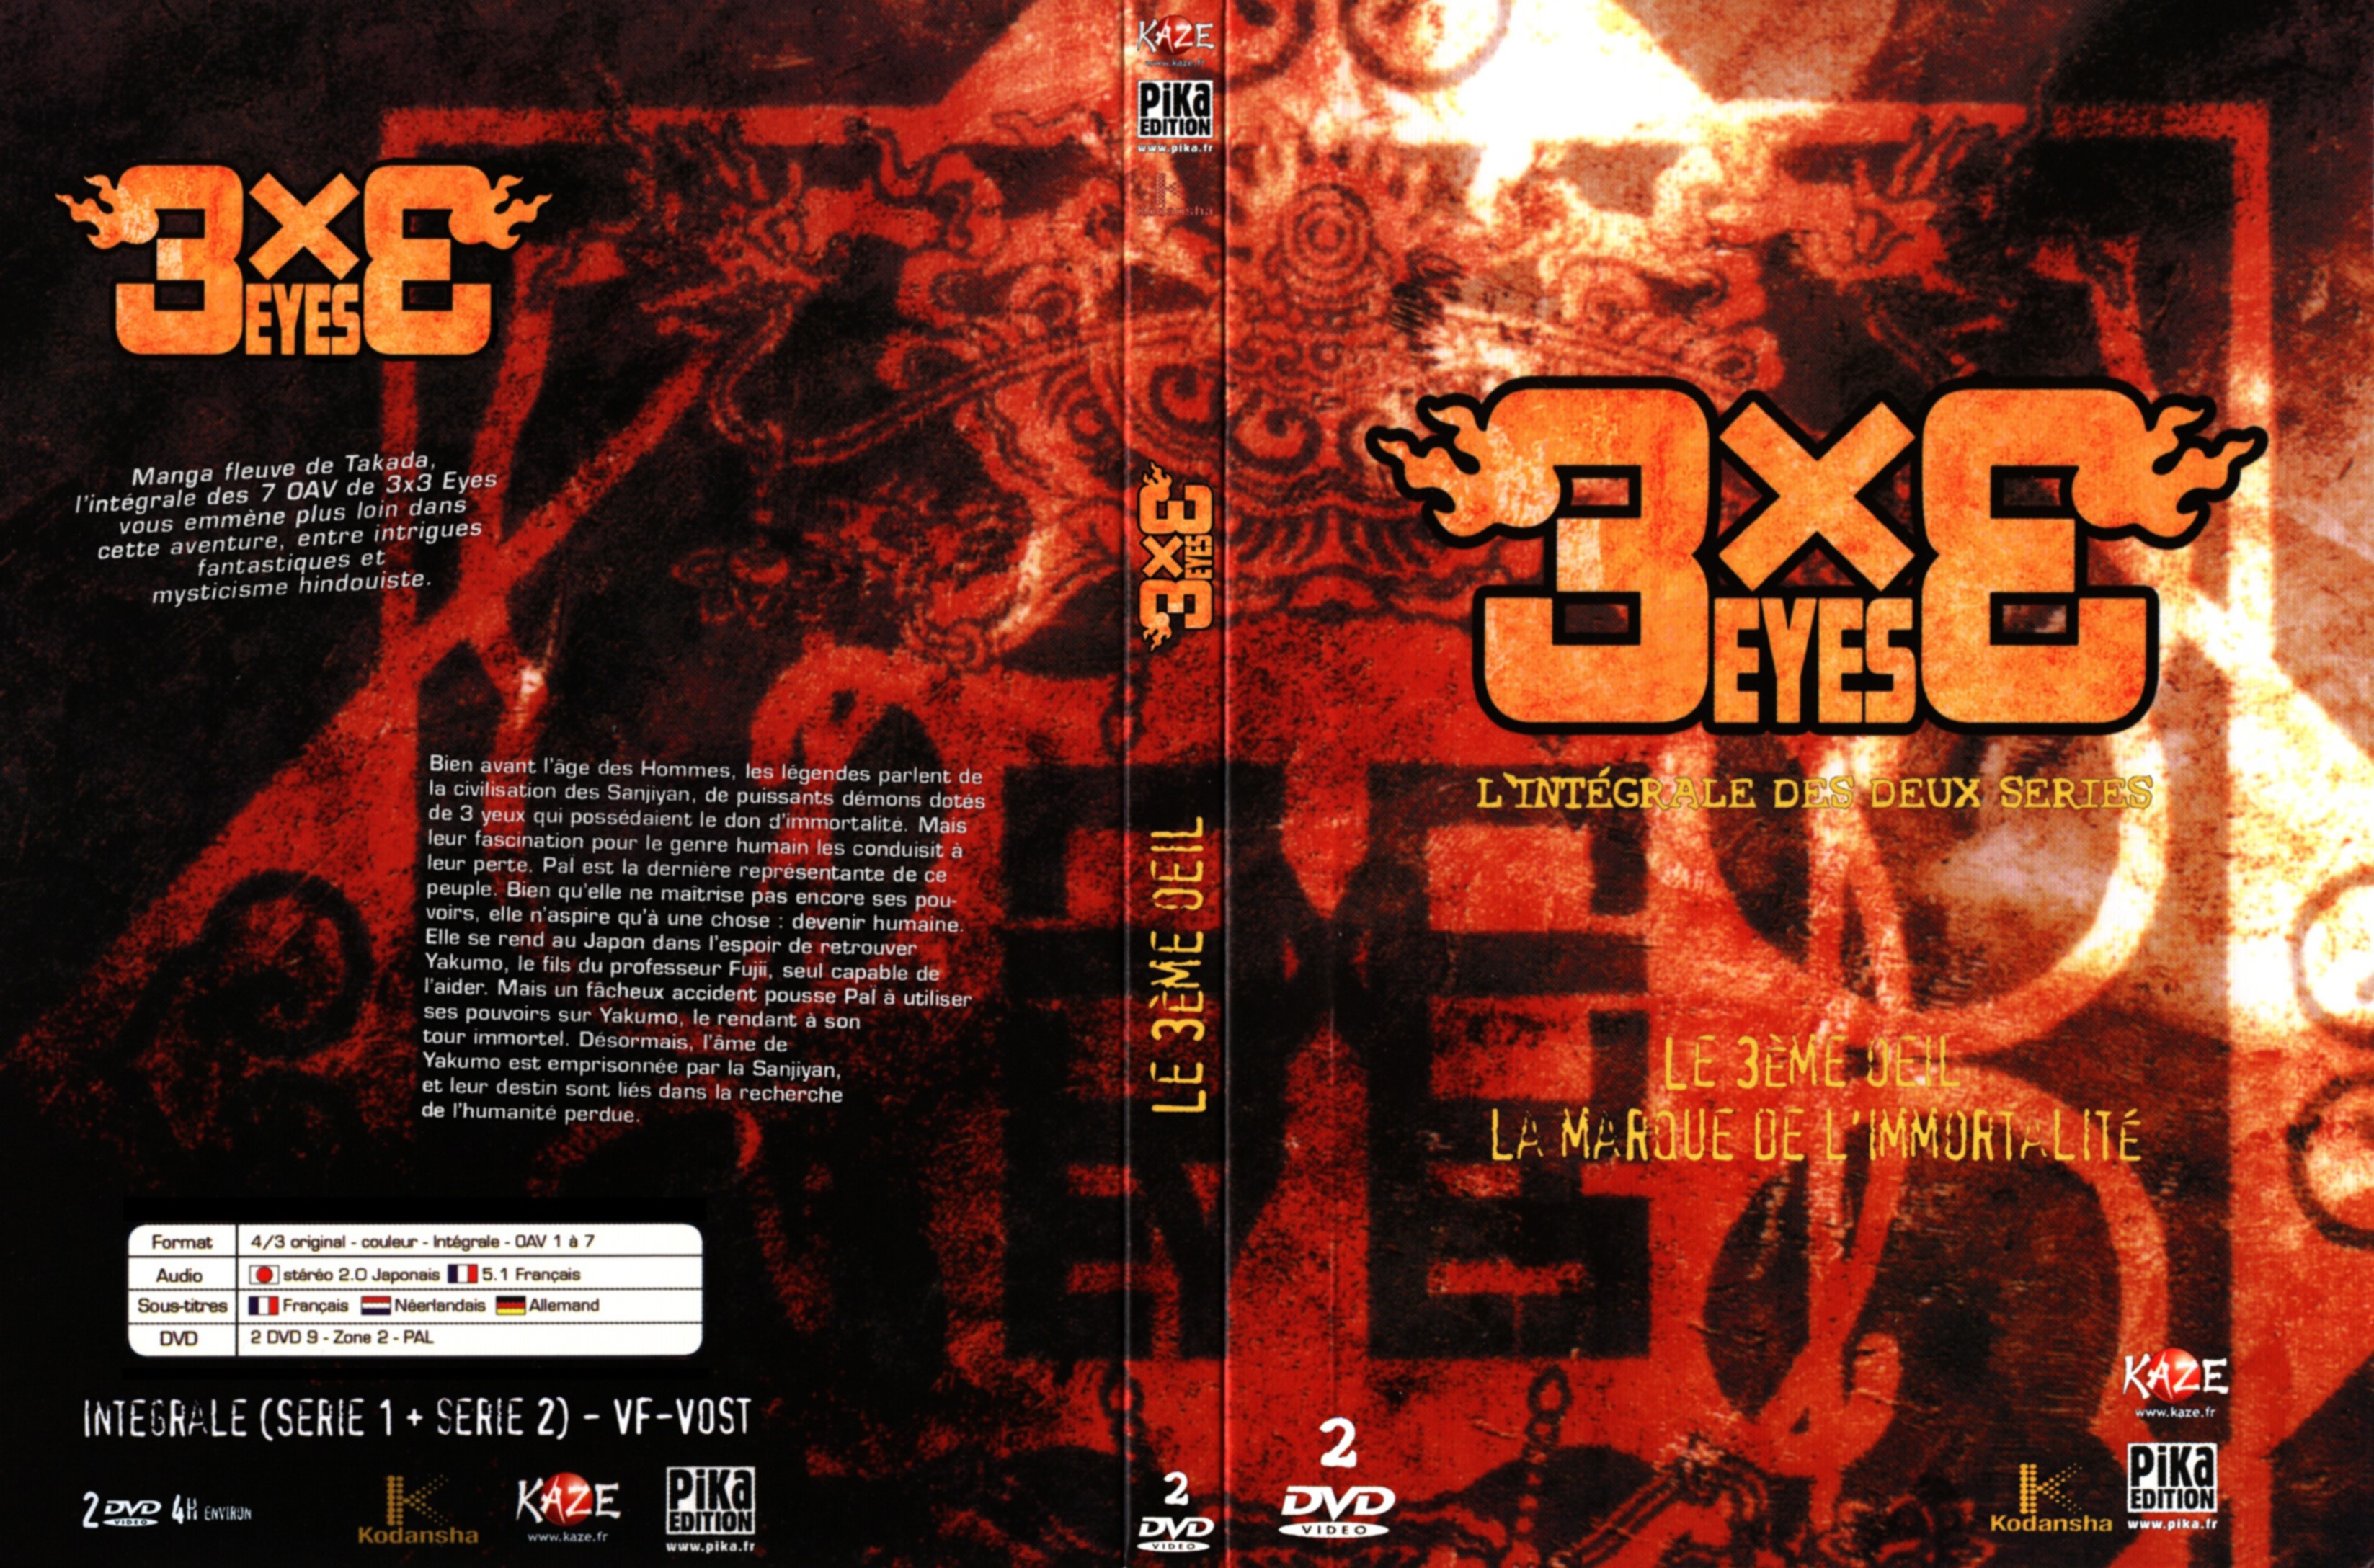 Jaquette DVD 3x3 eyes